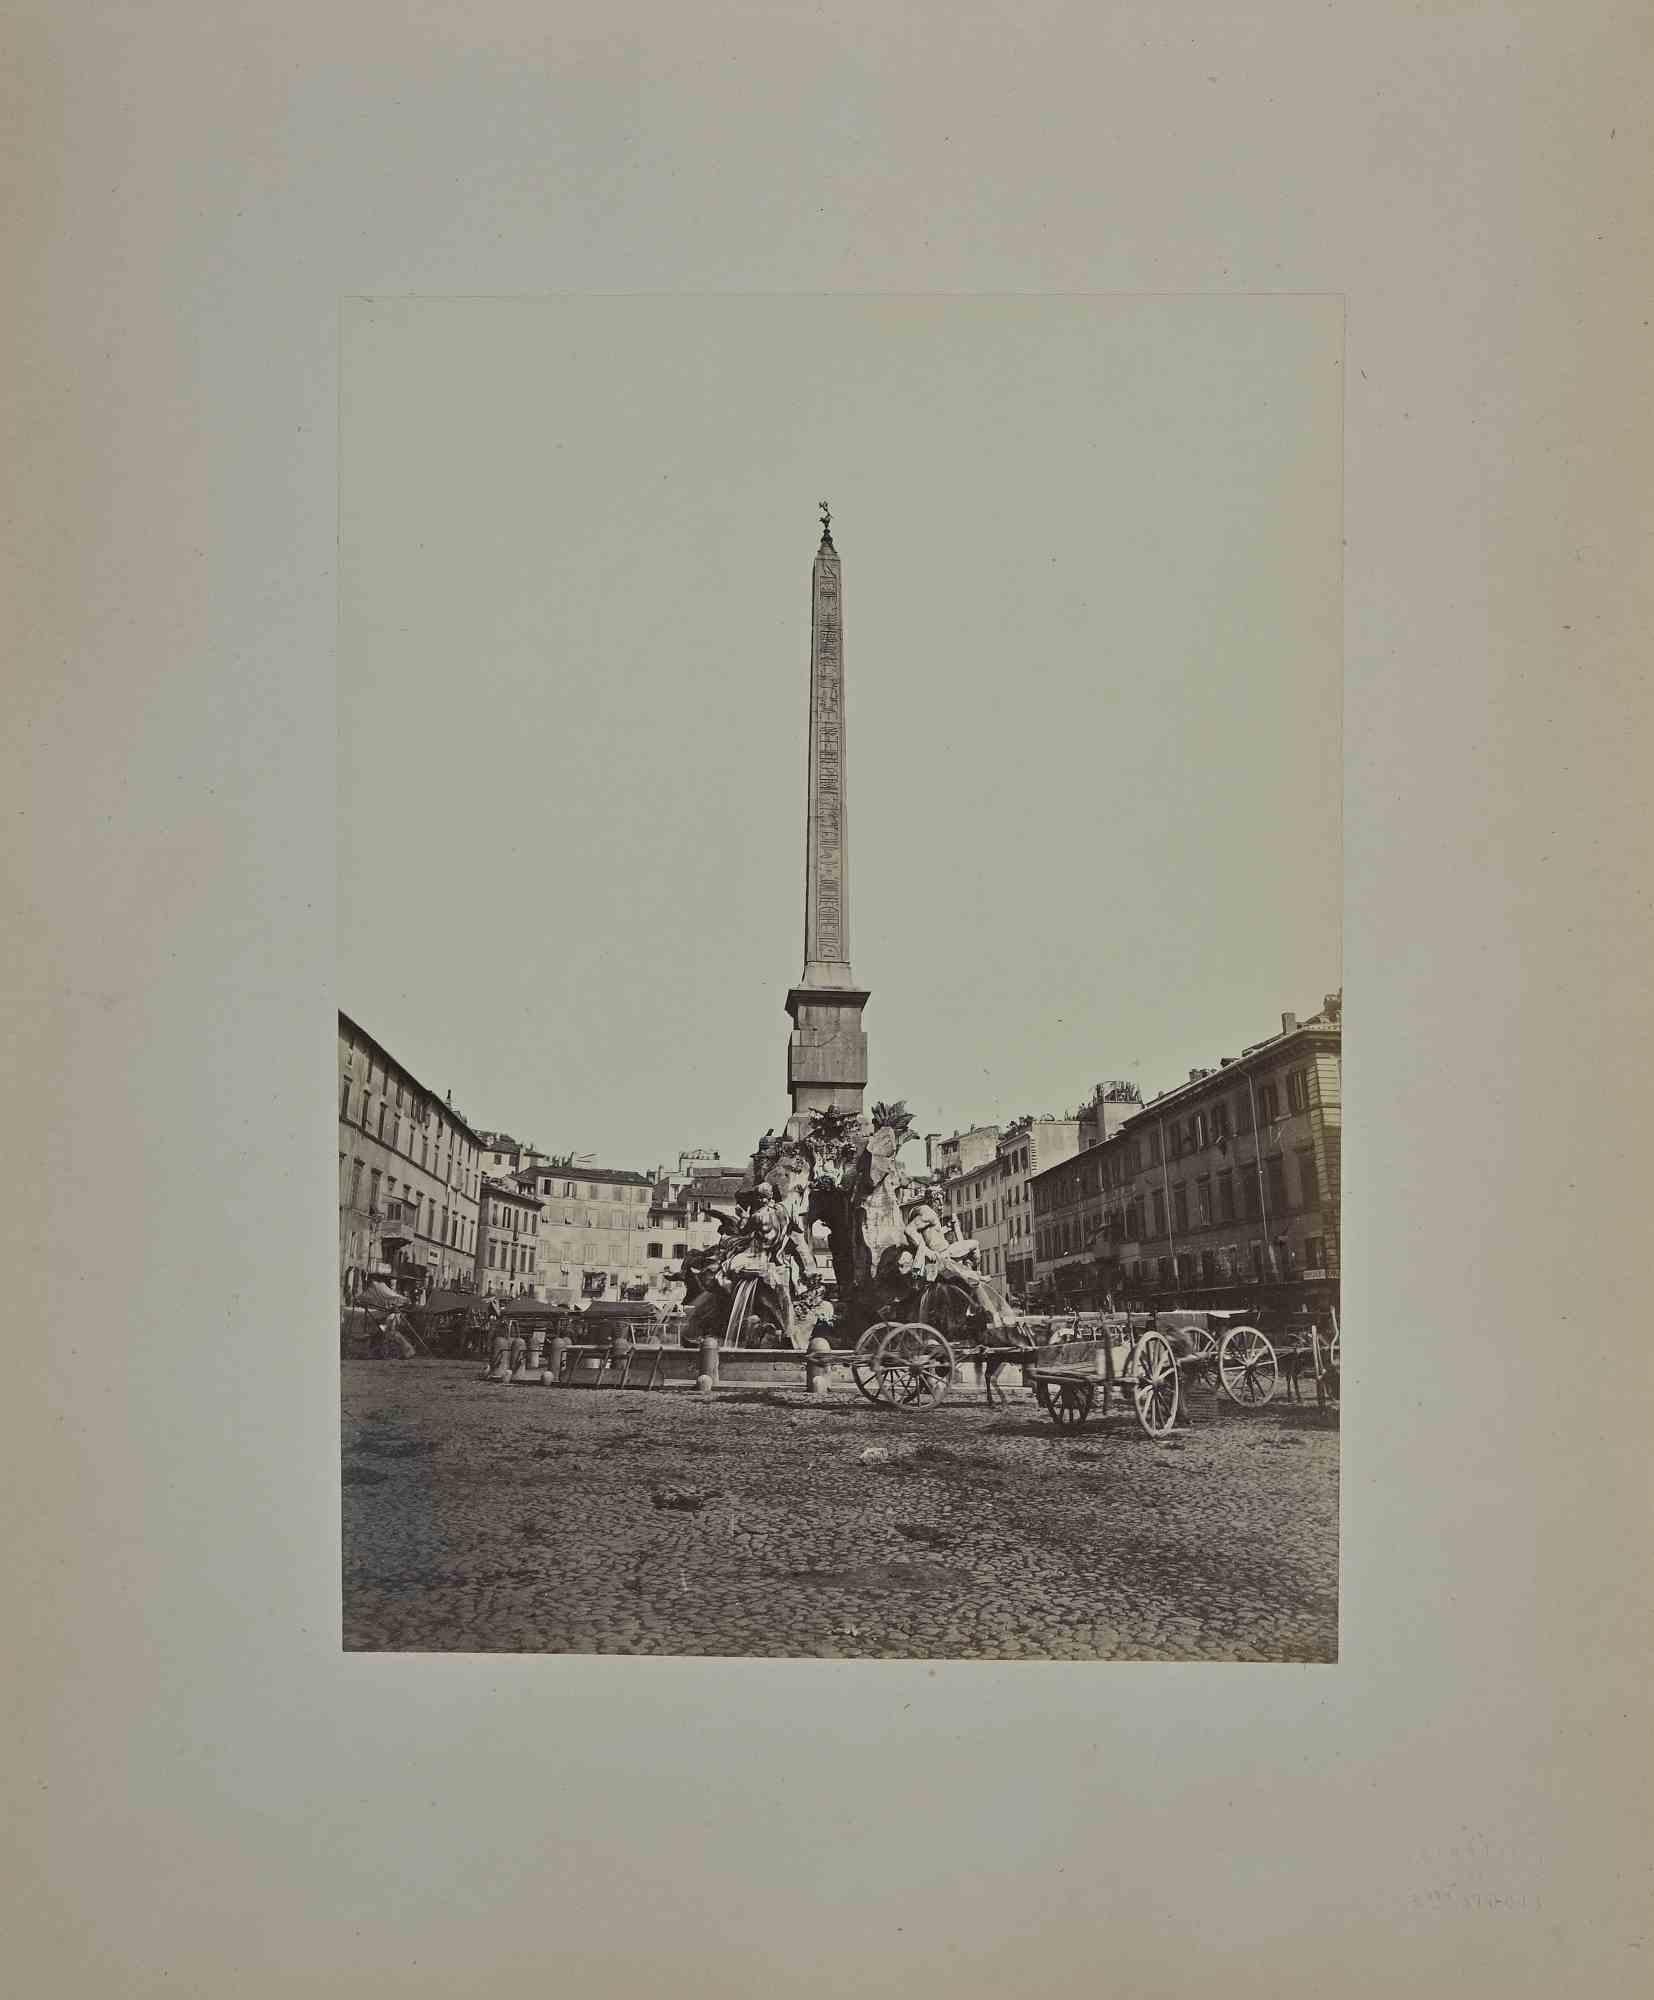 Francesco Sidoli Black and White Photograph - Ancient View of Piazza Navona - Photograph by F. Sidoli - Late 19th Century